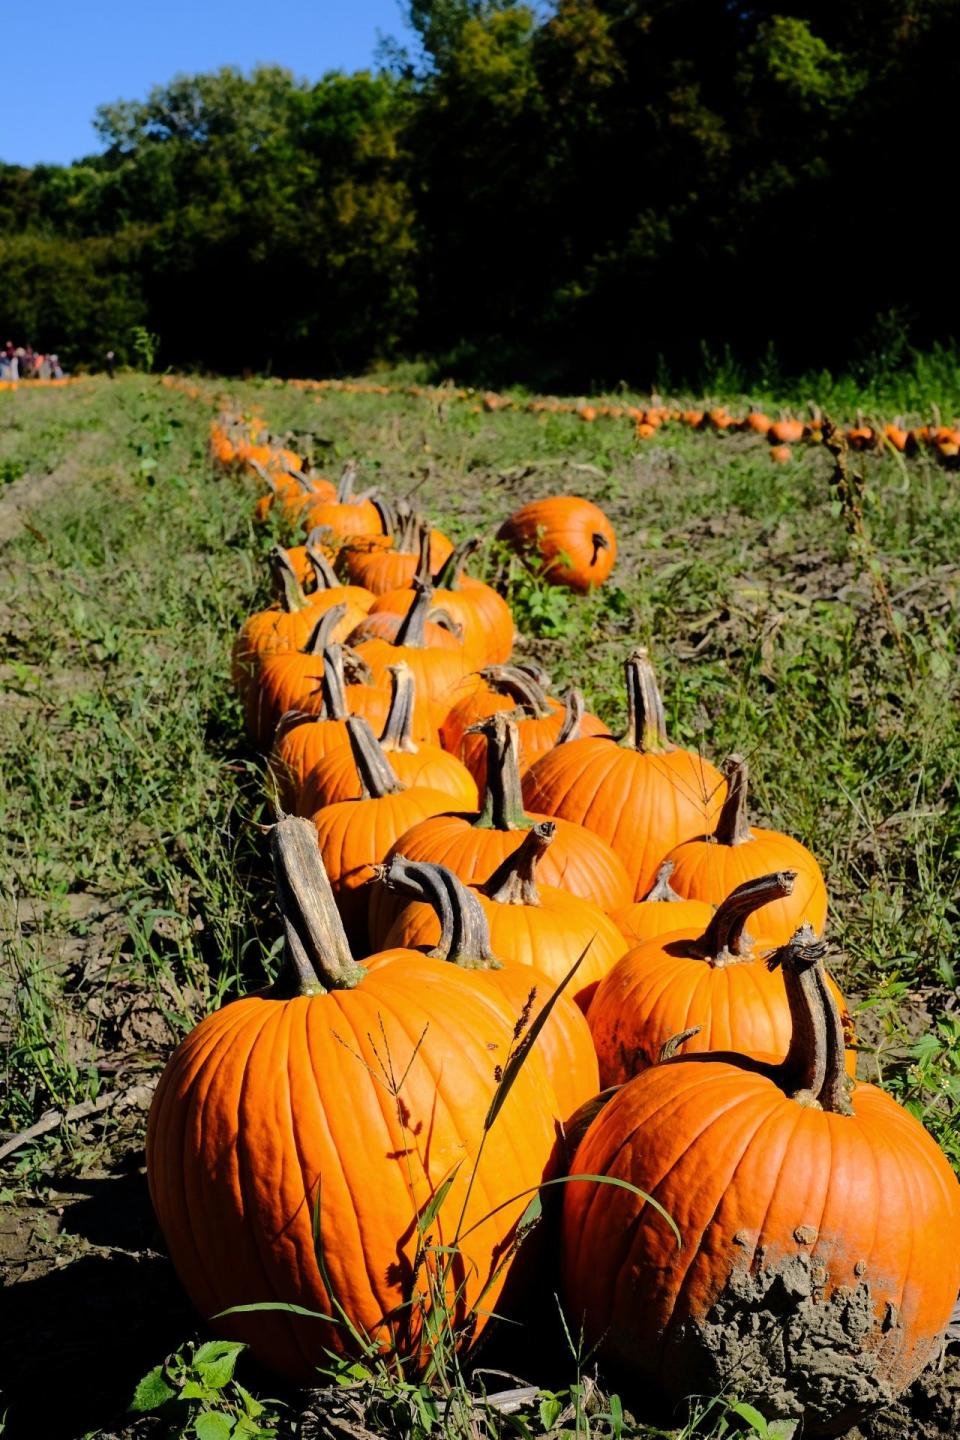 Pumpkins are lined up, waiting to be selected, on a field on the Intervale on Saturday, Oct. 5, 2019.